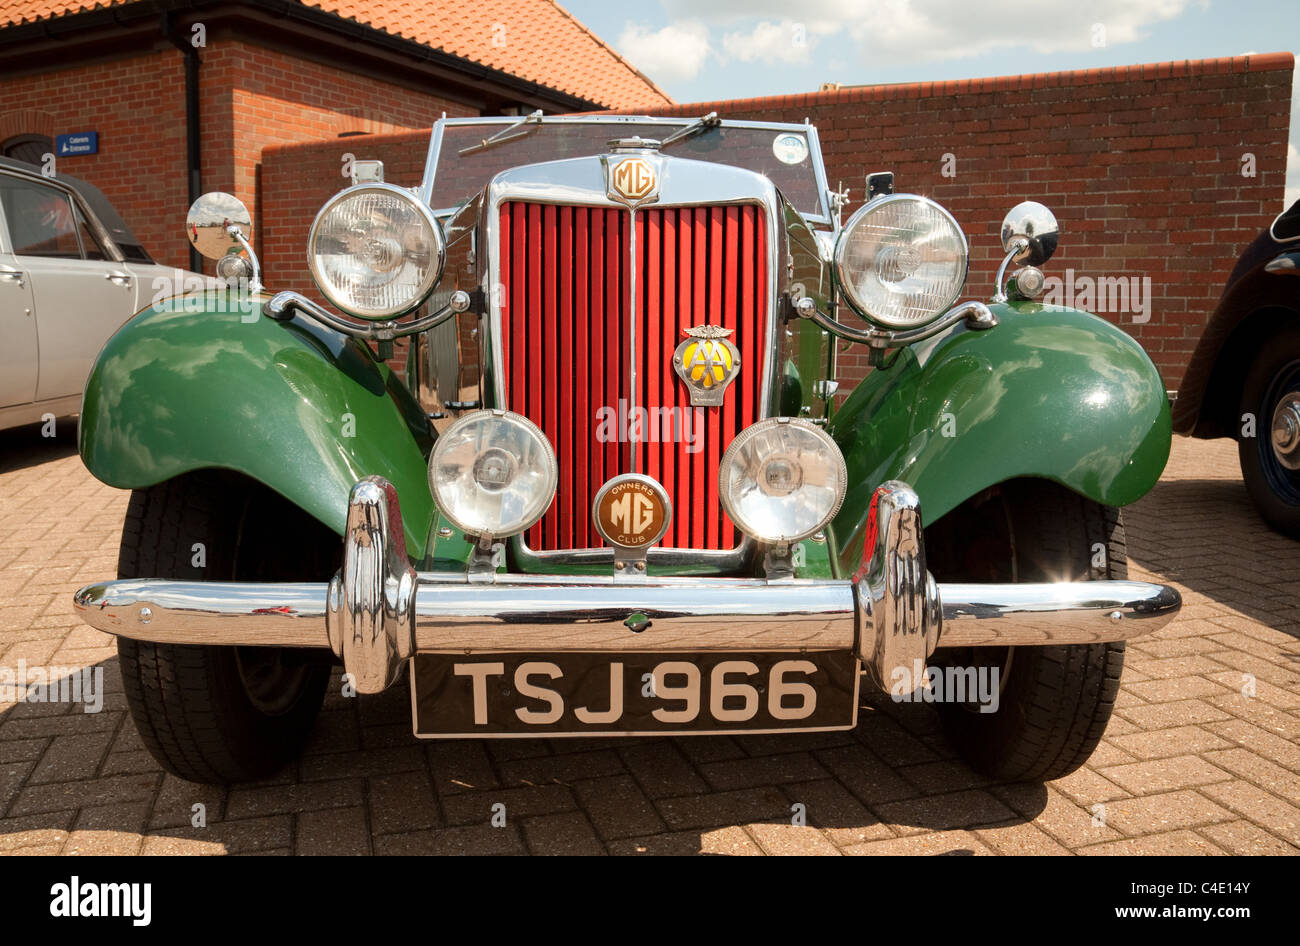 MG Classic car, front view Stock Photo